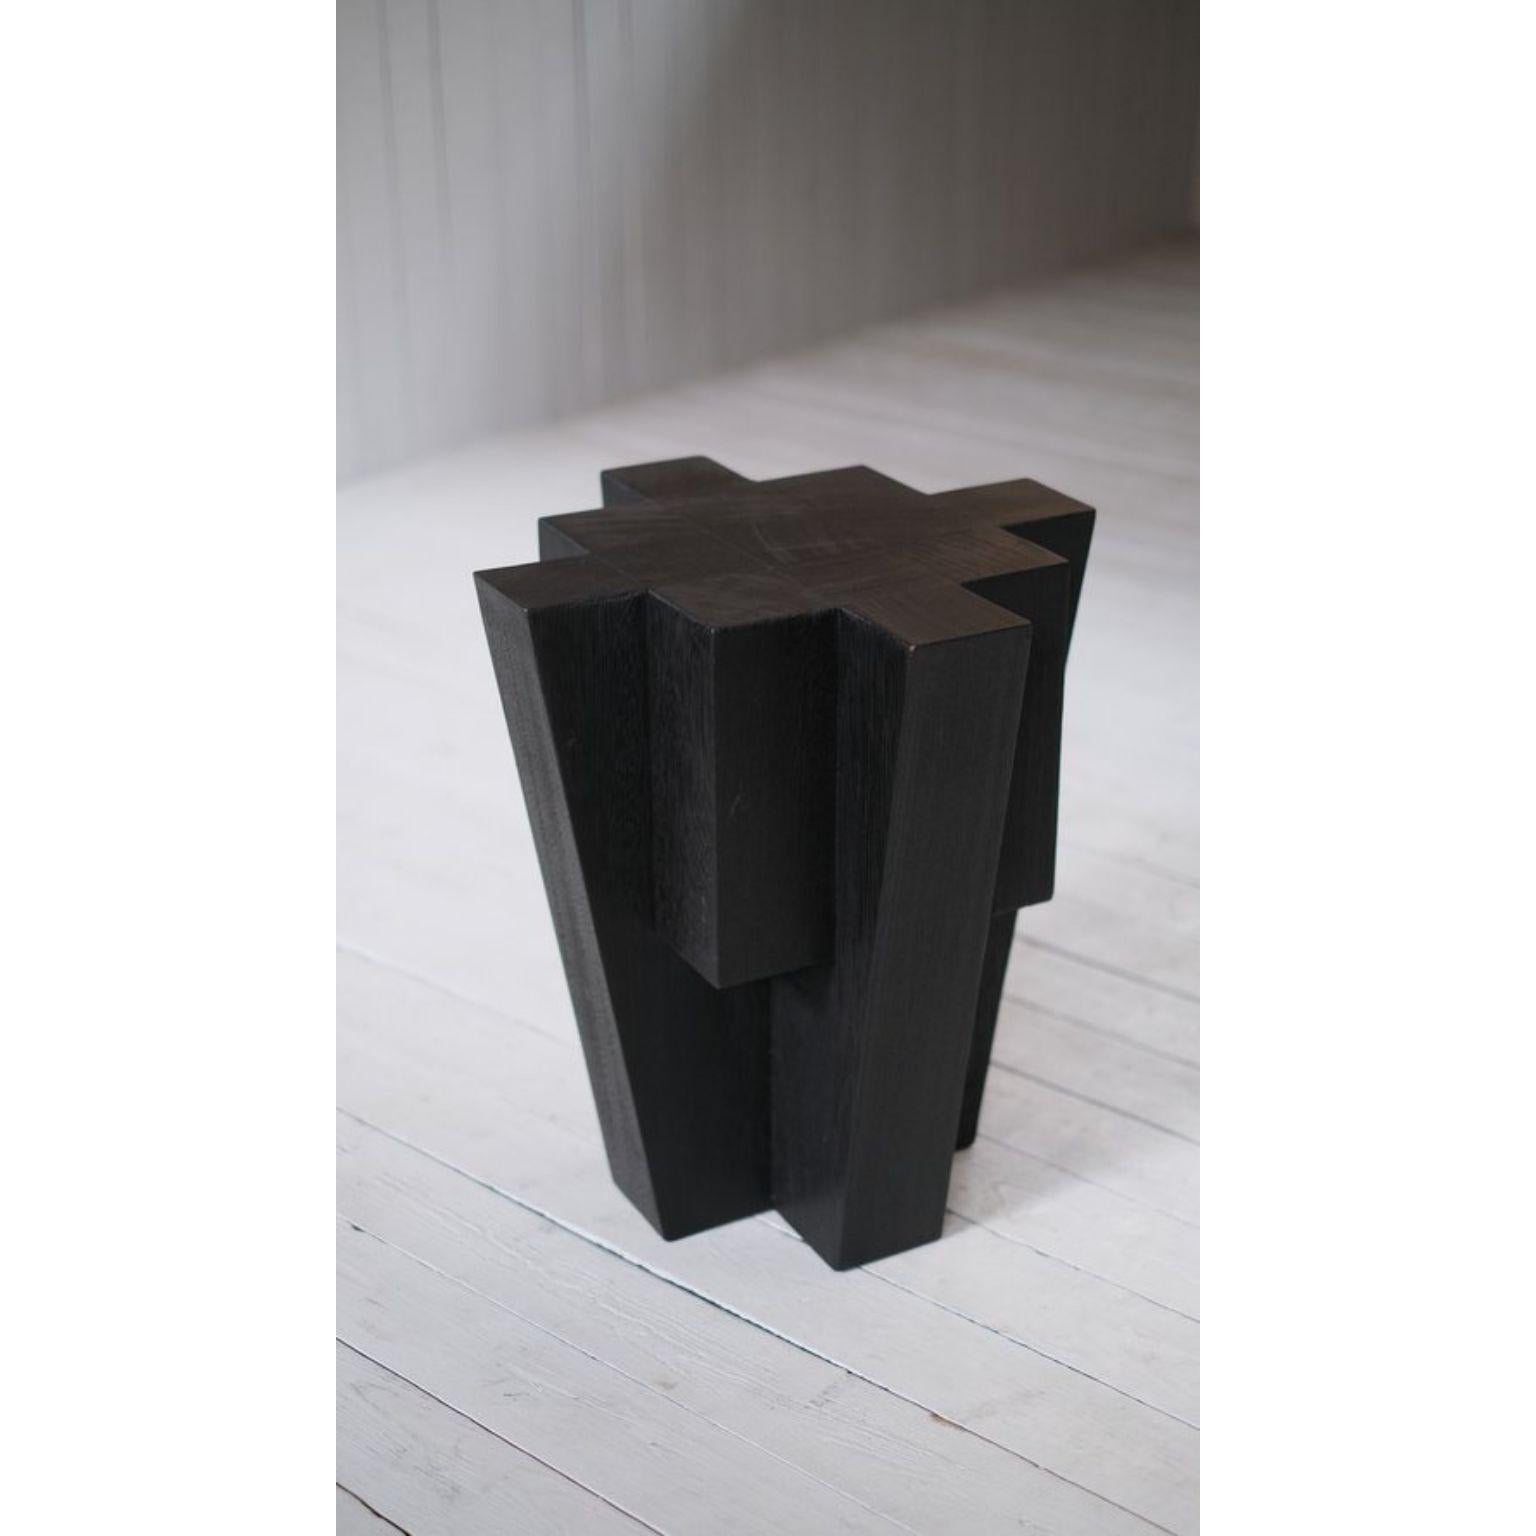 Black Bunker Side Table by Arno Declercq
Dimensions: D 45 x W 45 x H 50 cm. 
Materials: Burned and waxed Iroko wood.

Arno Declercq
Belgian designer and art dealer who makes bespoke objects with passion for design, atmosphere, history and